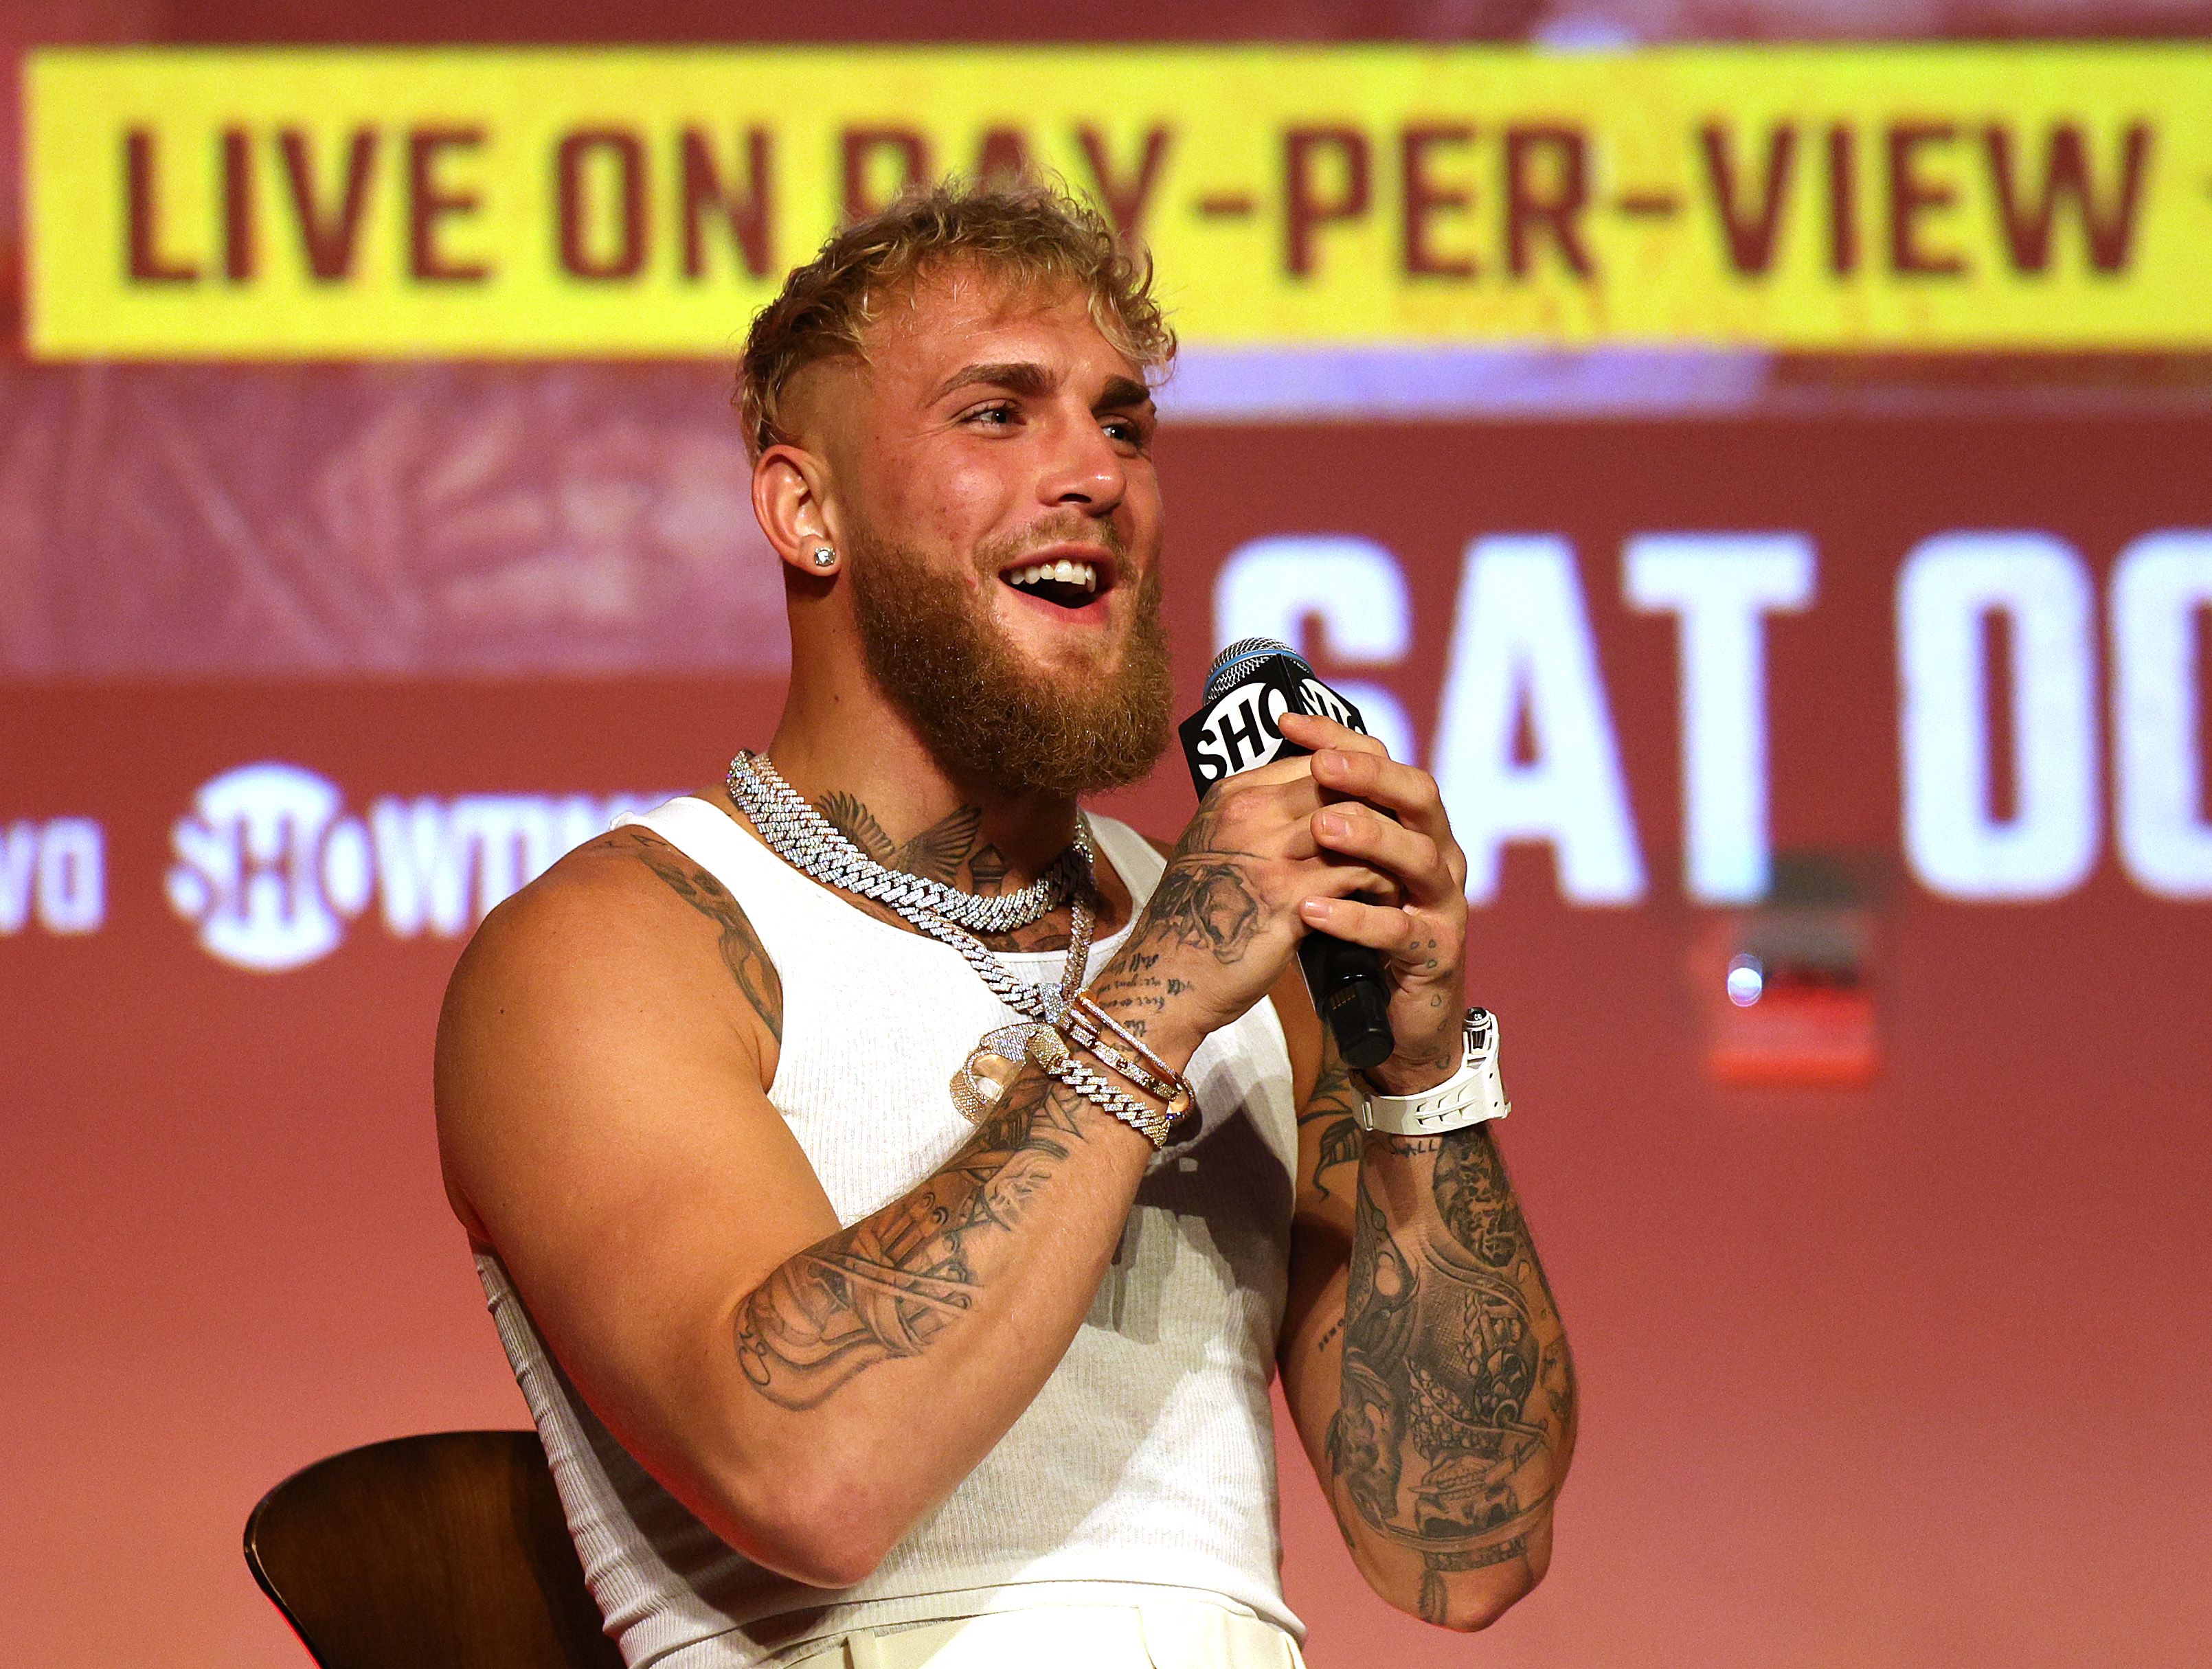 Jake Paul has vowed to deliver the KO of the year against Anderson Silva